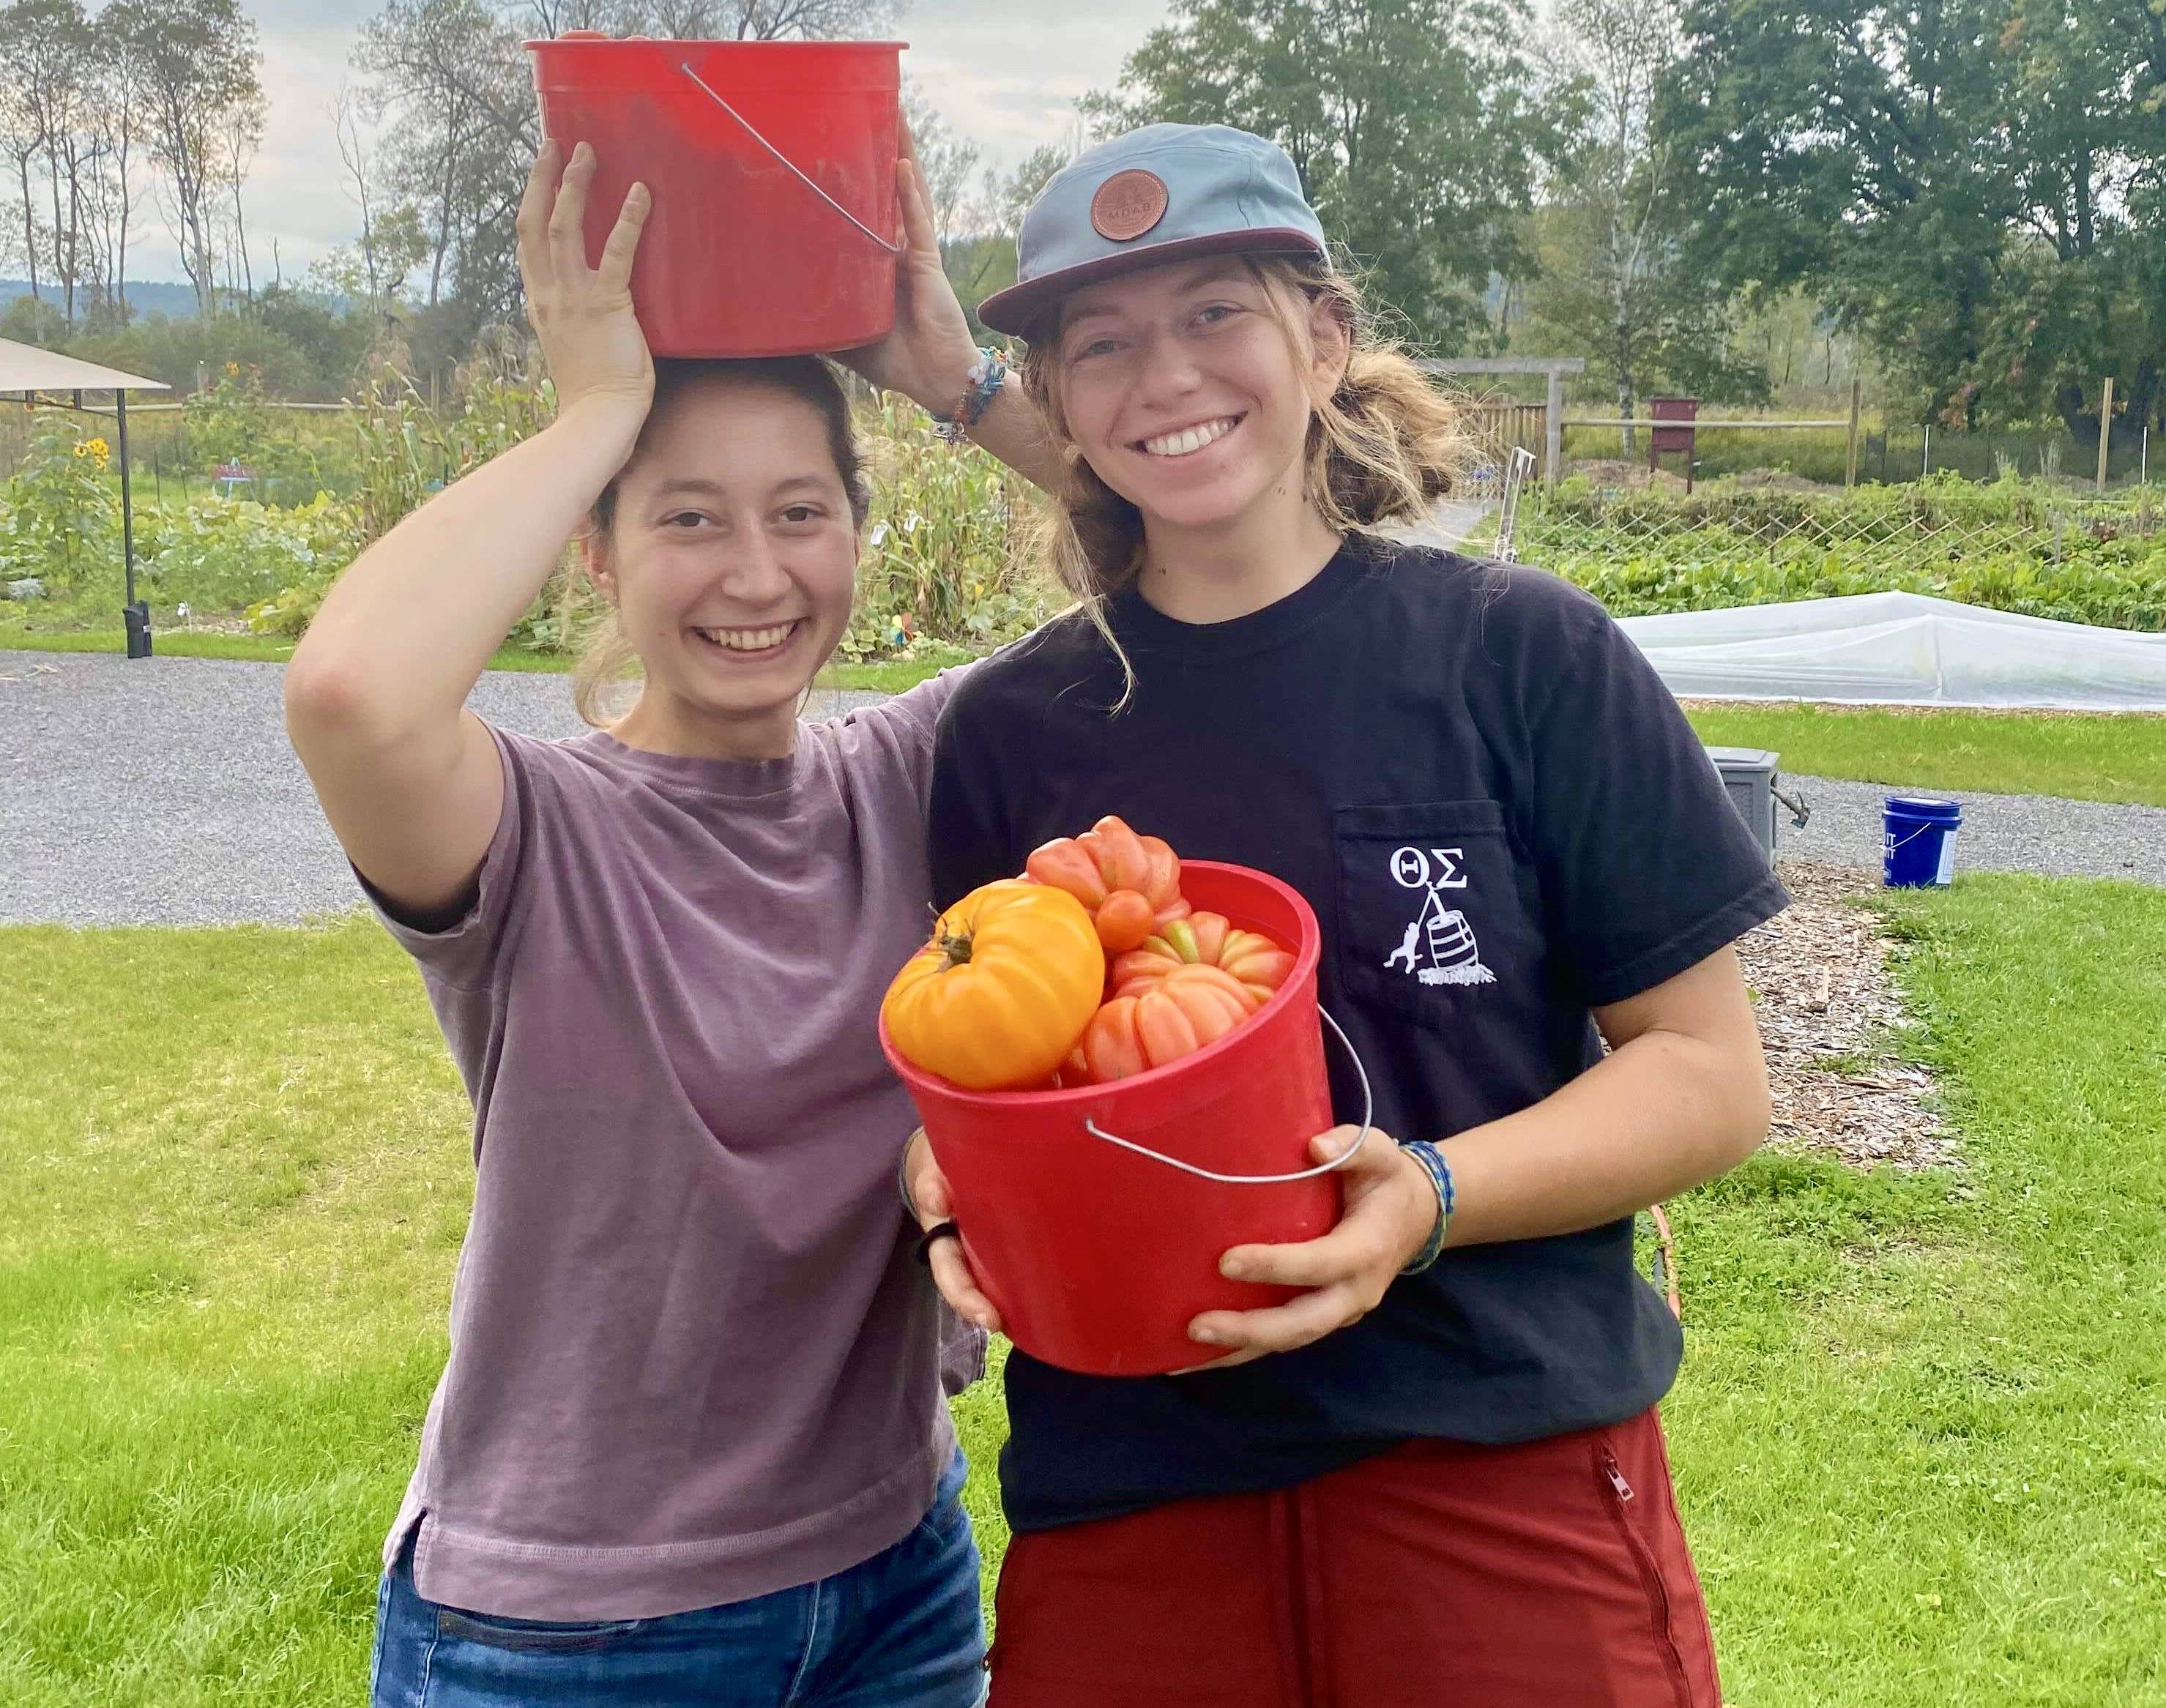 Two students in t-shirts show off their red buckets with freshly harvested pumpkins, tomatoes, and more.